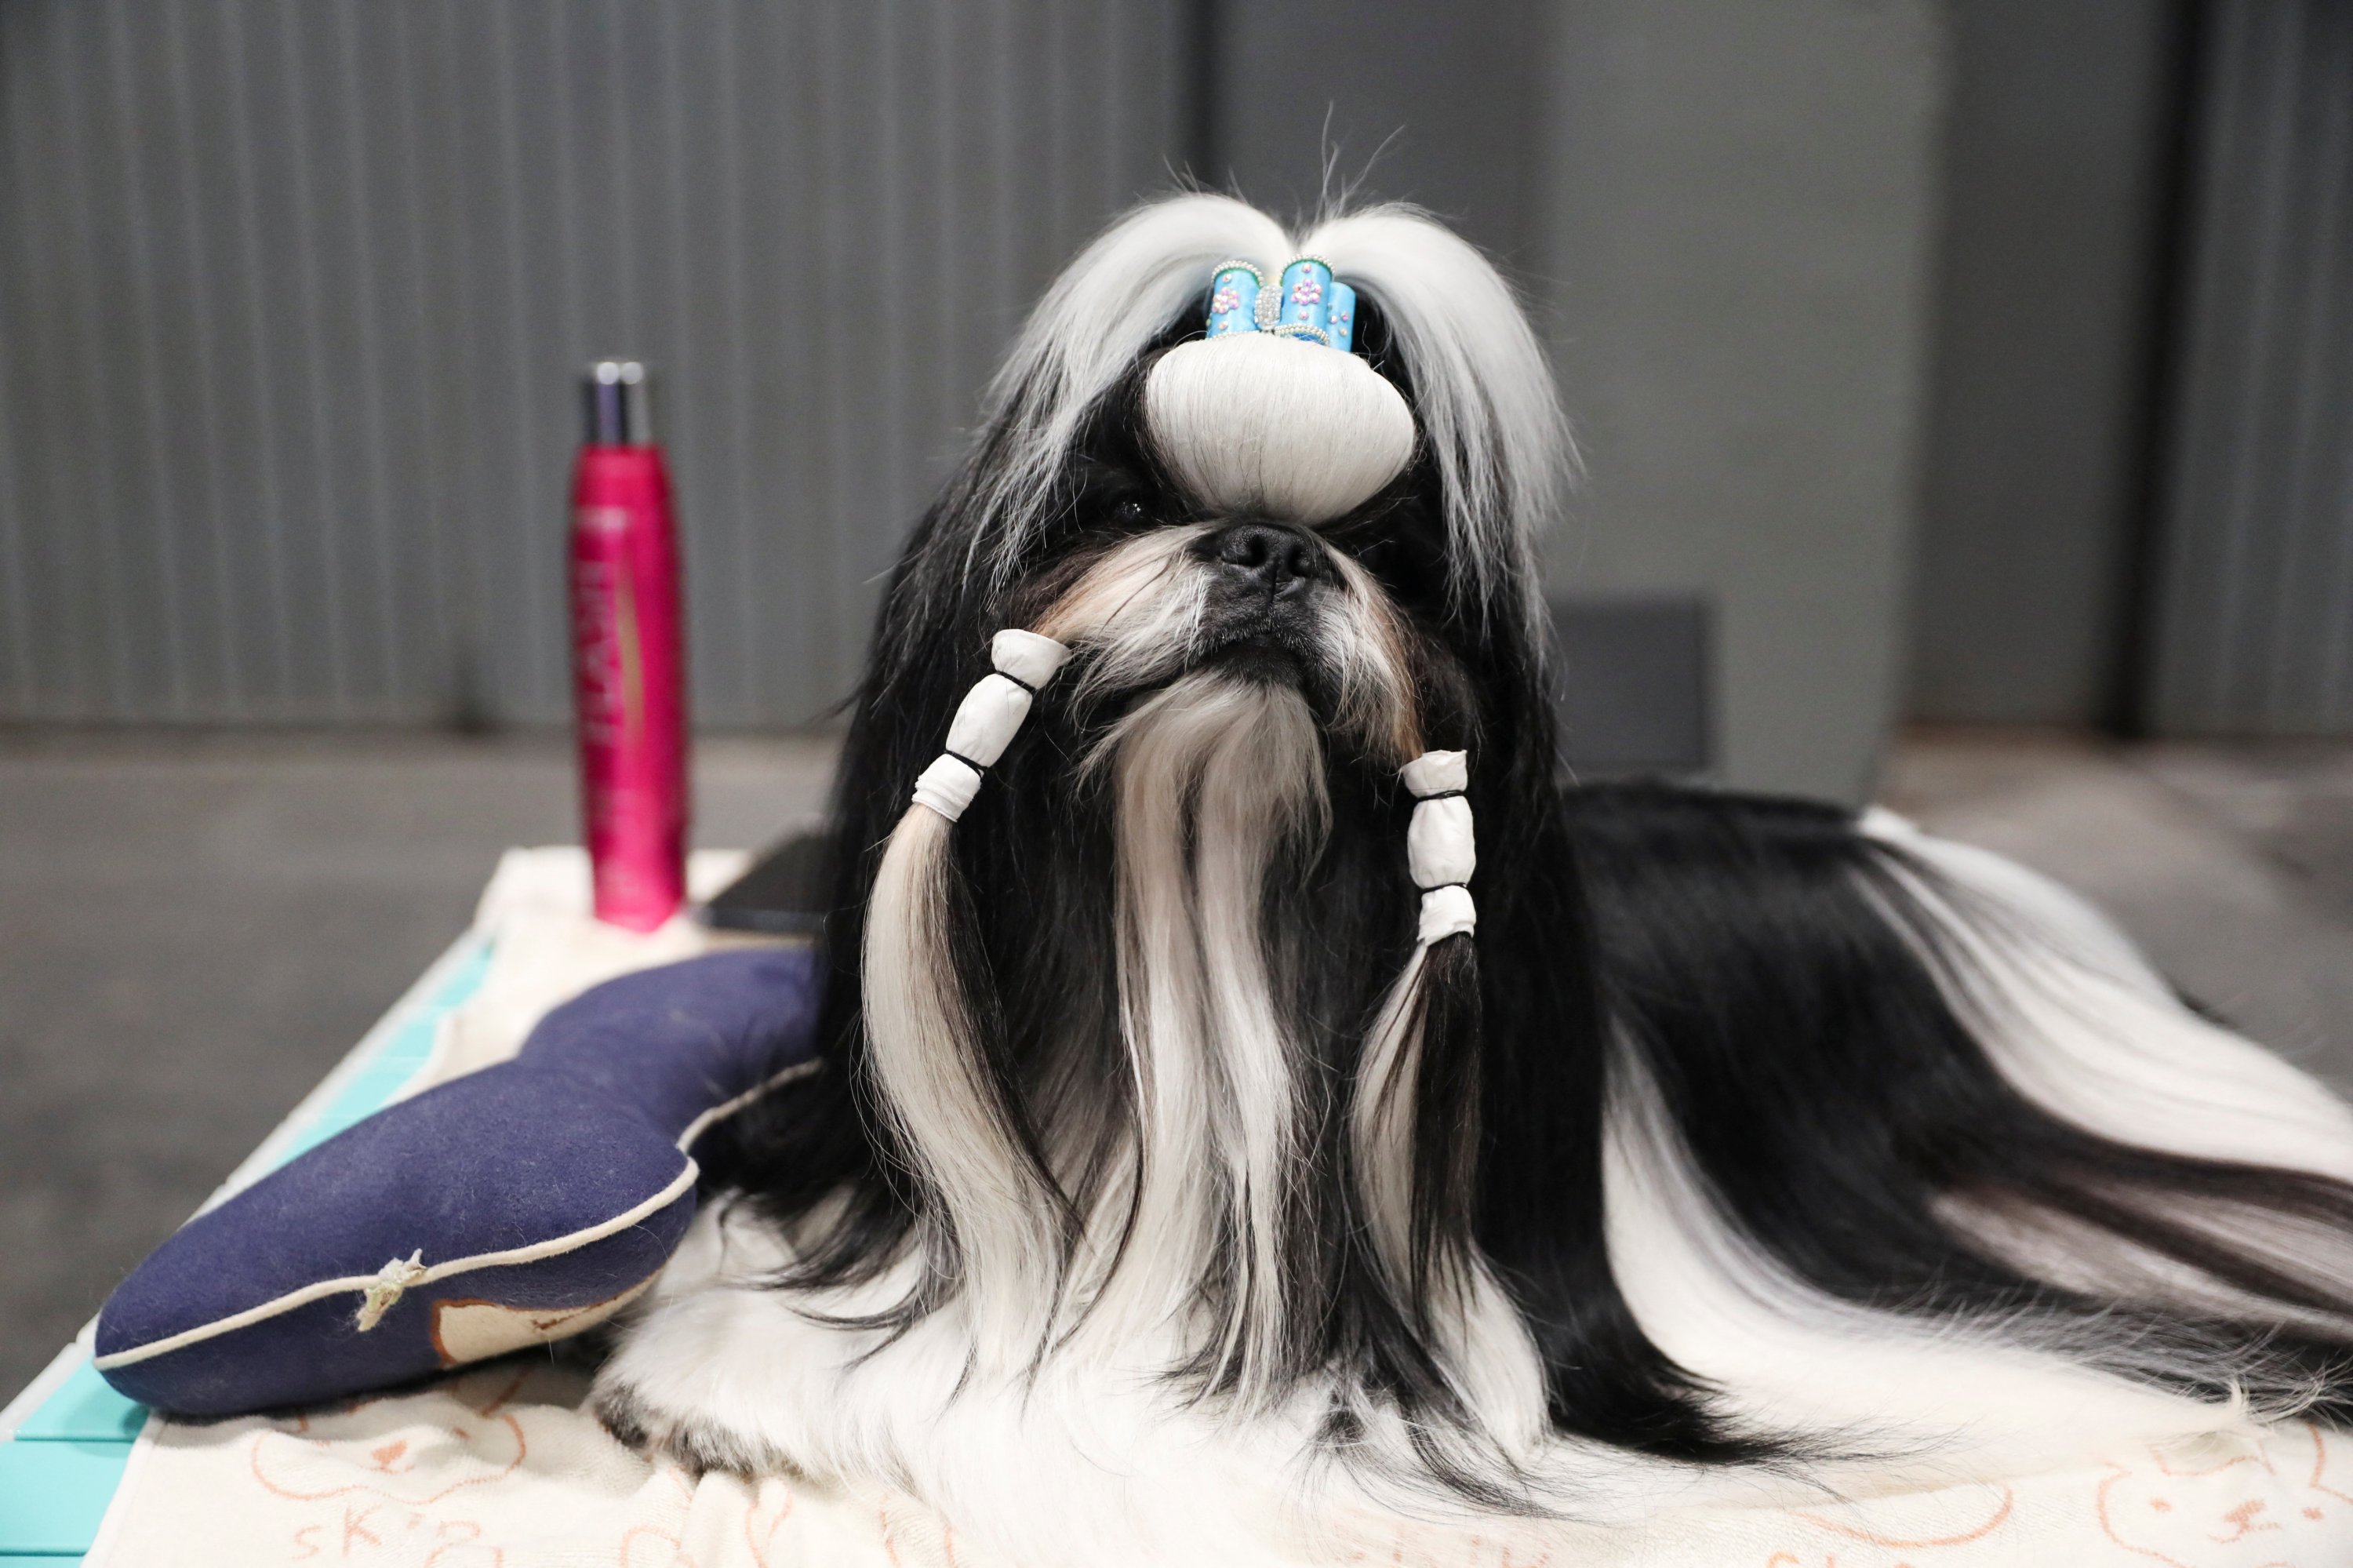 A Shih Tzu rests at a grooming table at the World Dog Show 2022, which more than 15,000 dogs from around the world are expected to attend, at the IFEMA conference center in Madrid, Spain, June 23, 2022. (Photo Reuters)